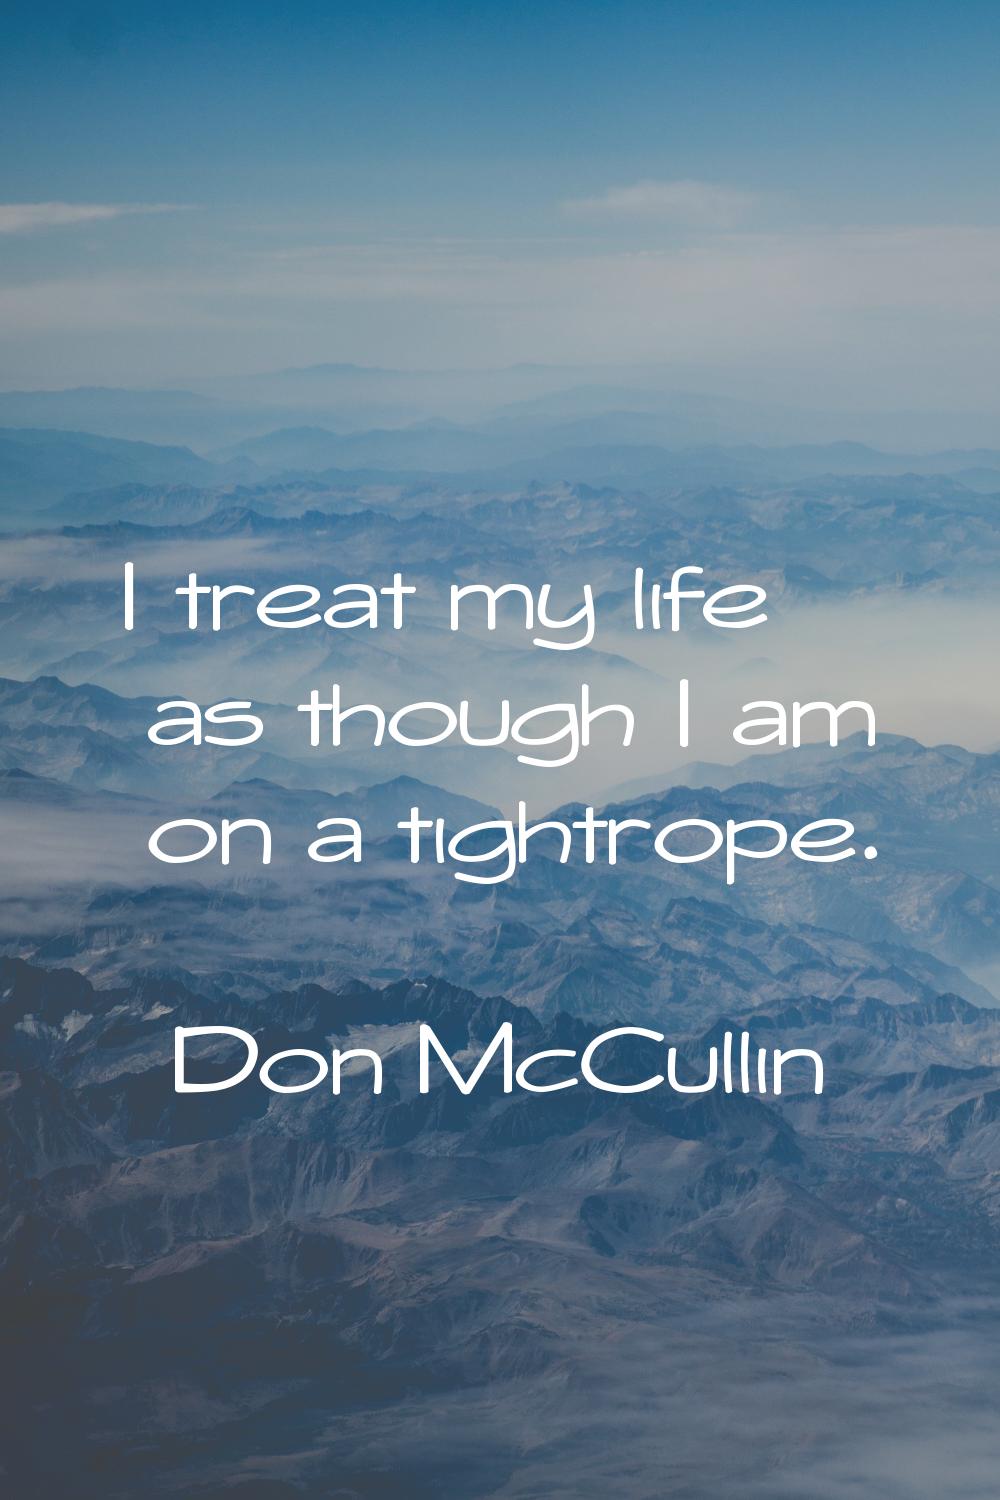 I treat my life as though I am on a tightrope.